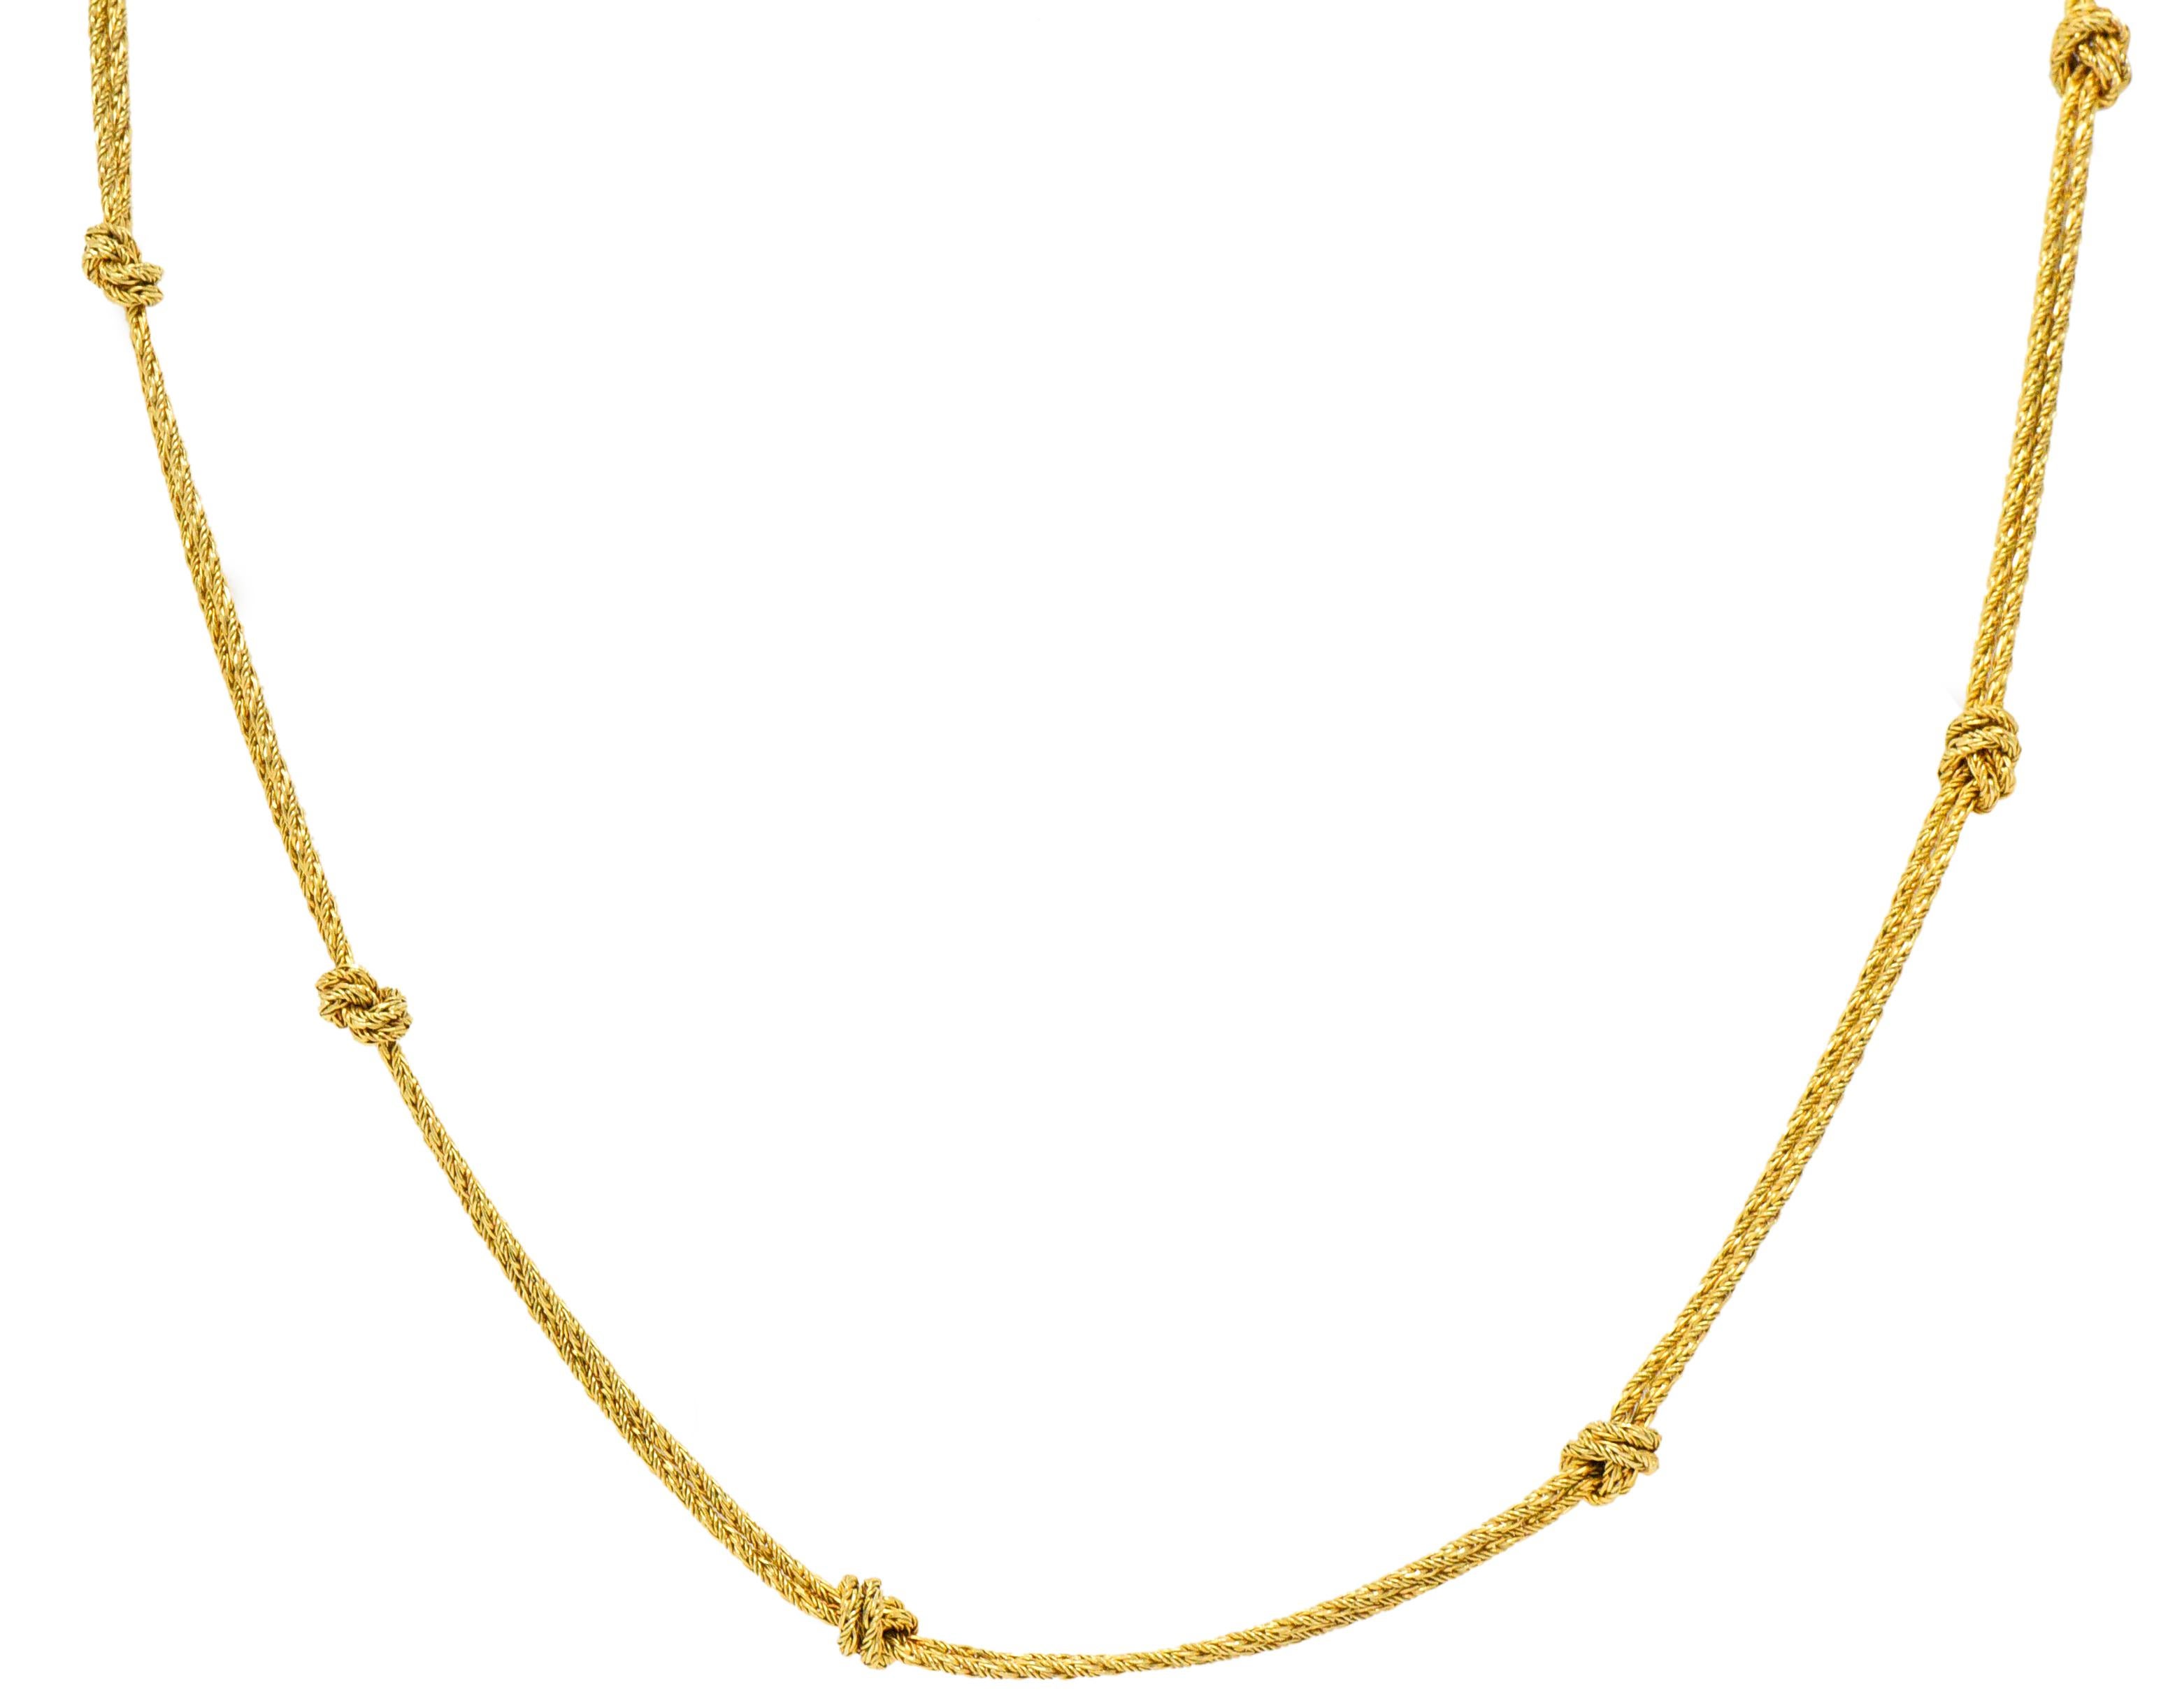 Woven wheat style  double chain 

With knotted chain stations

Completed by a lobster clasp 

Fully signed Tiffany & Co. Germany

Accompanied by original pouch

Length: 24 Inches

Width: 1/4 Inch (widest knot)

Total Weight: 17.7 Grams

Chic.